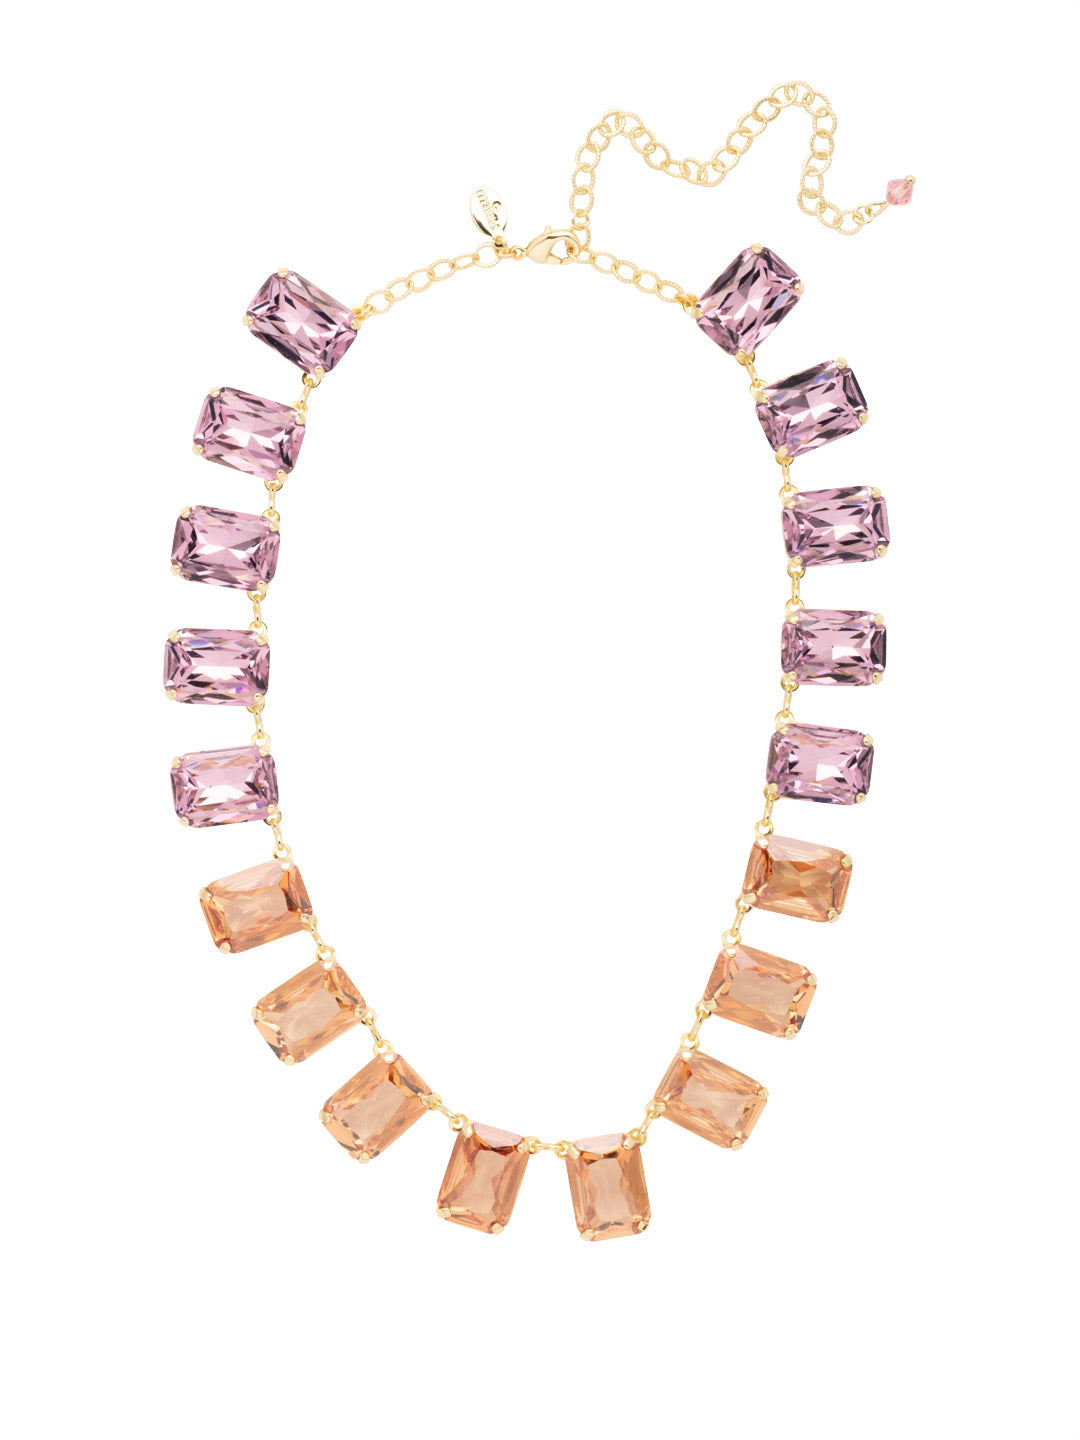 Julianna Emerald Statement Necklace - NFD77BGFSK - <p>The Julianna Emerald Statement Necklace features a row of octagon cut candy drop crystals around an adjustable chain, secured with a lobster claw clasp. From Sorrelli's First Kiss collection in our Bright Gold-tone finish.</p>